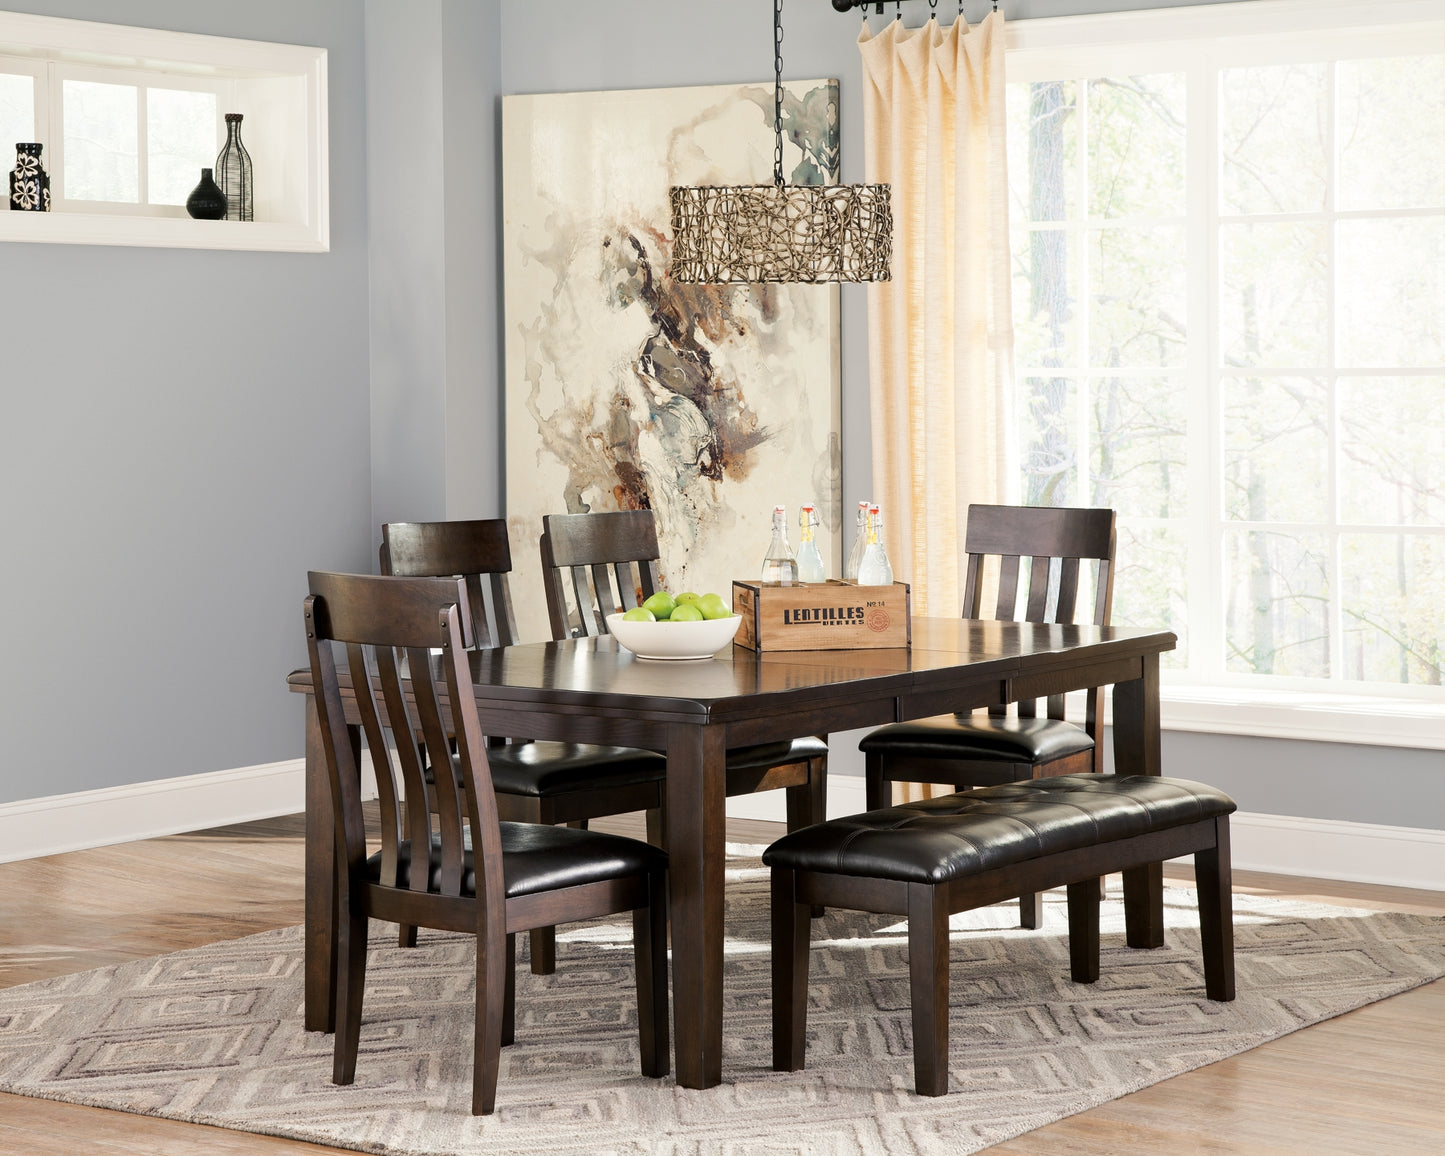 Haddigan Dining Table and 4 Chairs and Bench JB's Furniture  Home Furniture, Home Decor, Furniture Store